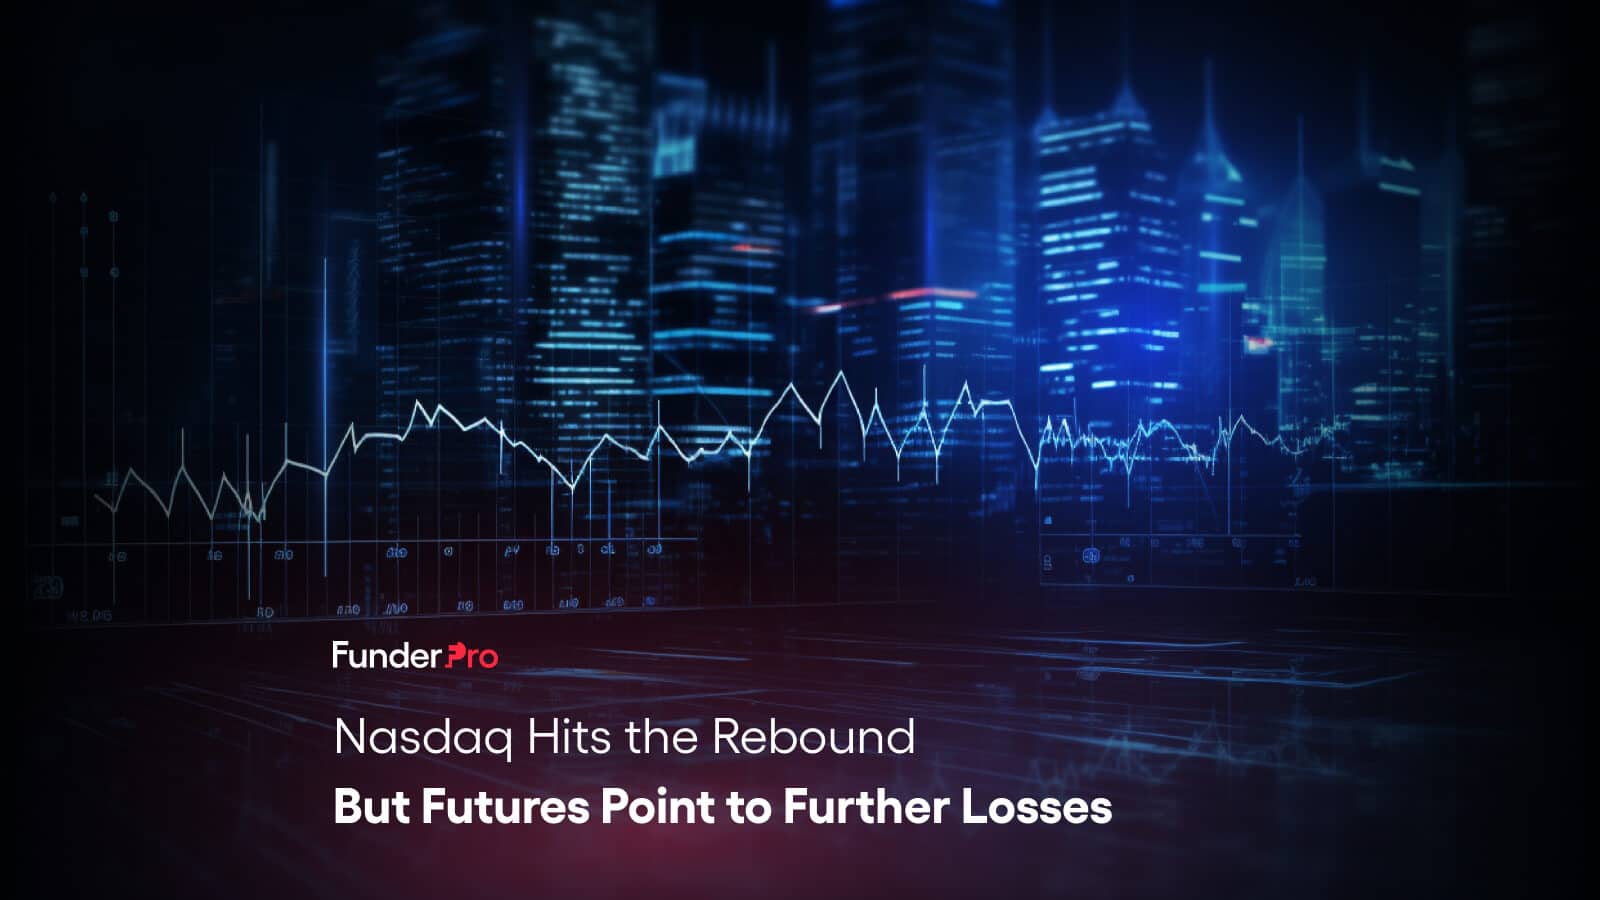 Nasdaq Hits the Rebound But Futures Point to Further Losses